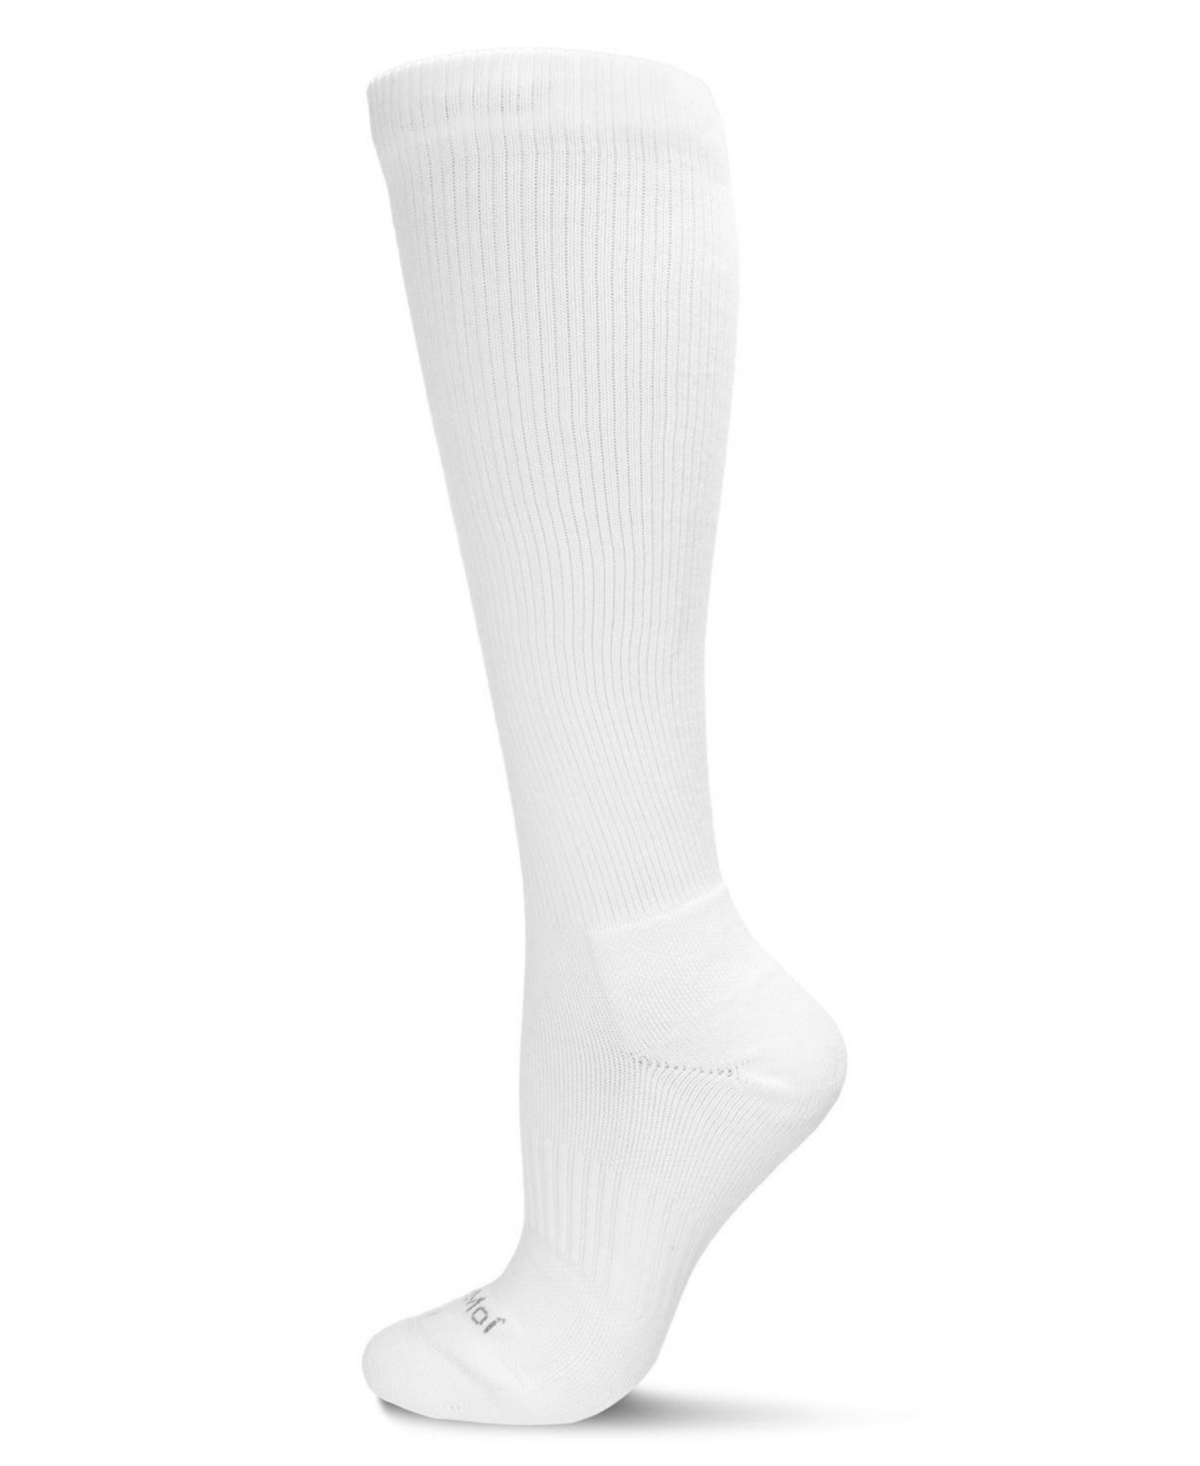 Men's Classic Athletic Cushion Sole Compression Knee Sock - White